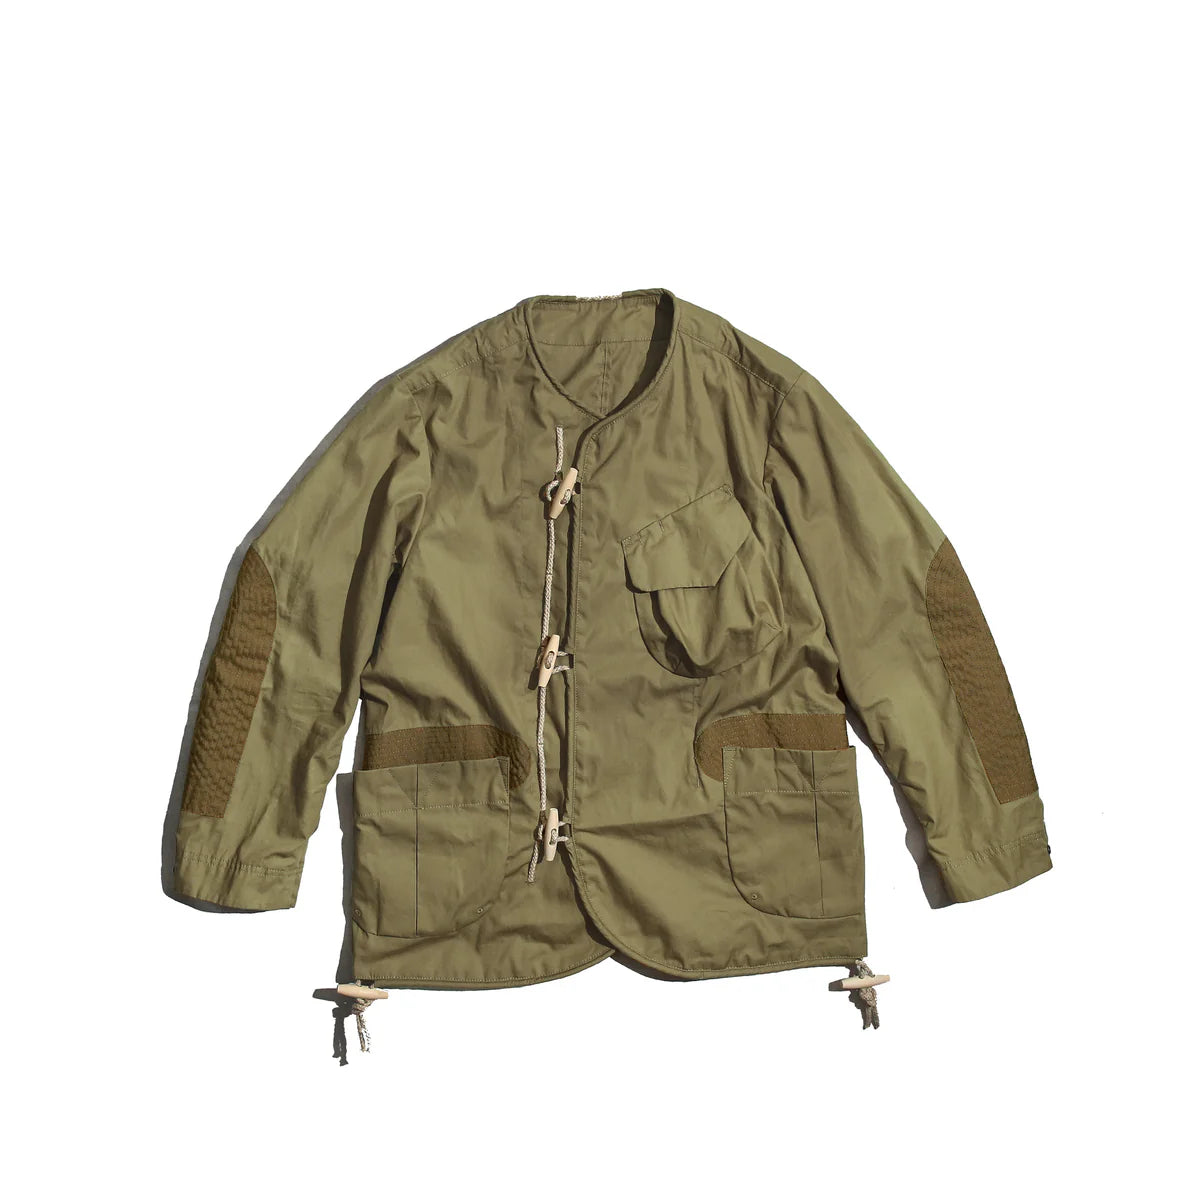 Norbit - Proban Duffel Coverall - HNJK-025 - Olive - Space Camp